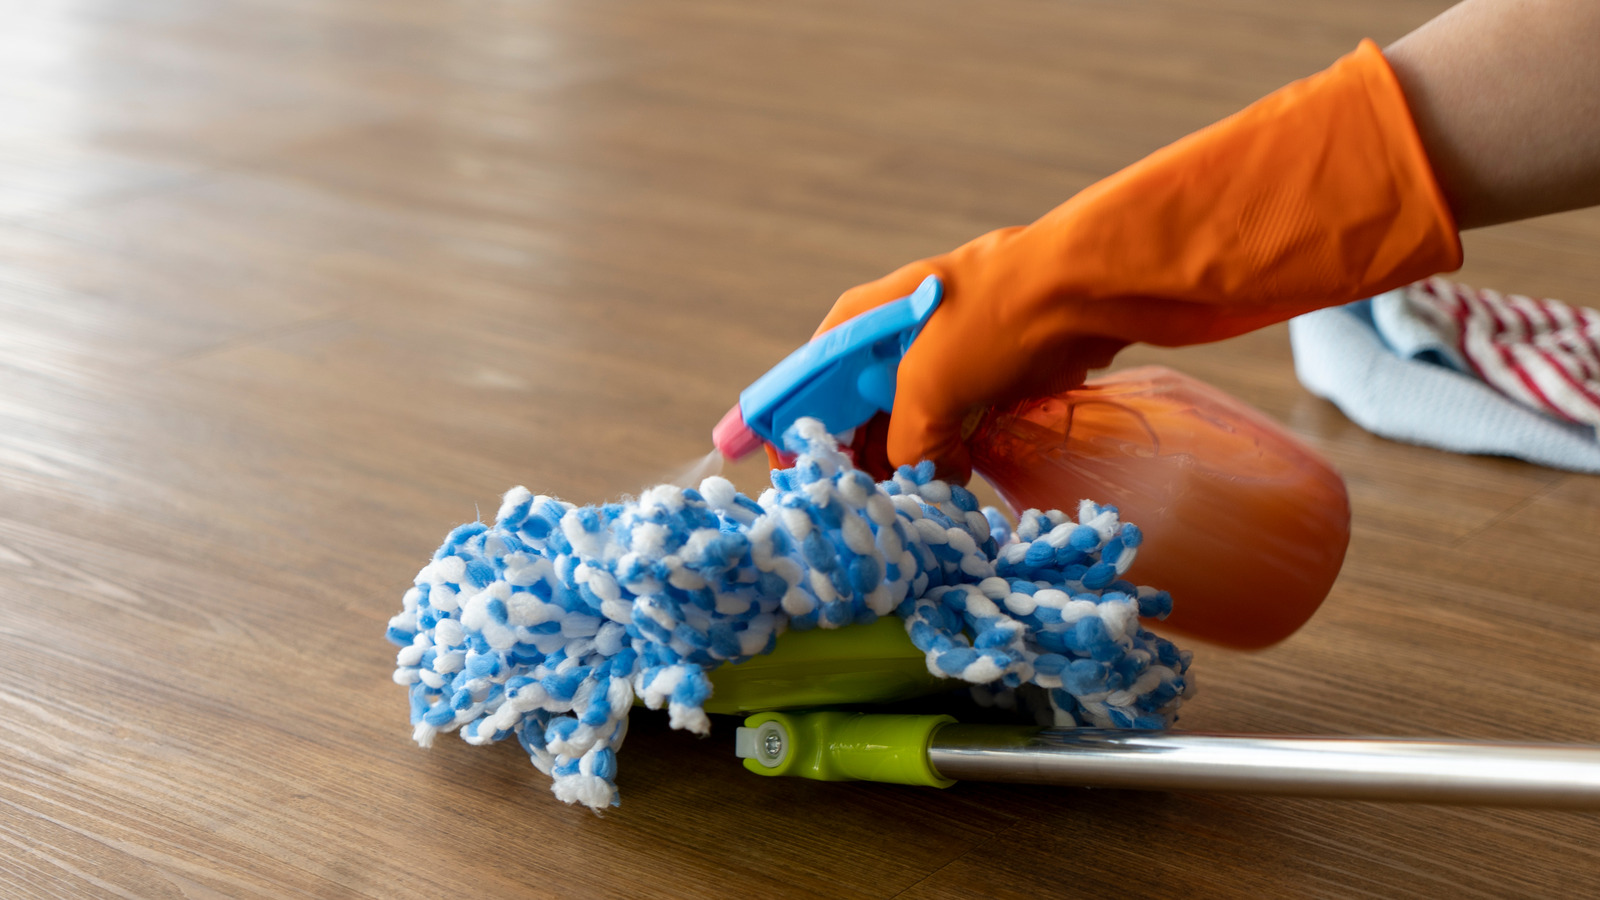 Cleaning Agents You Should Seriously Avoid Using On Vinyl Floors